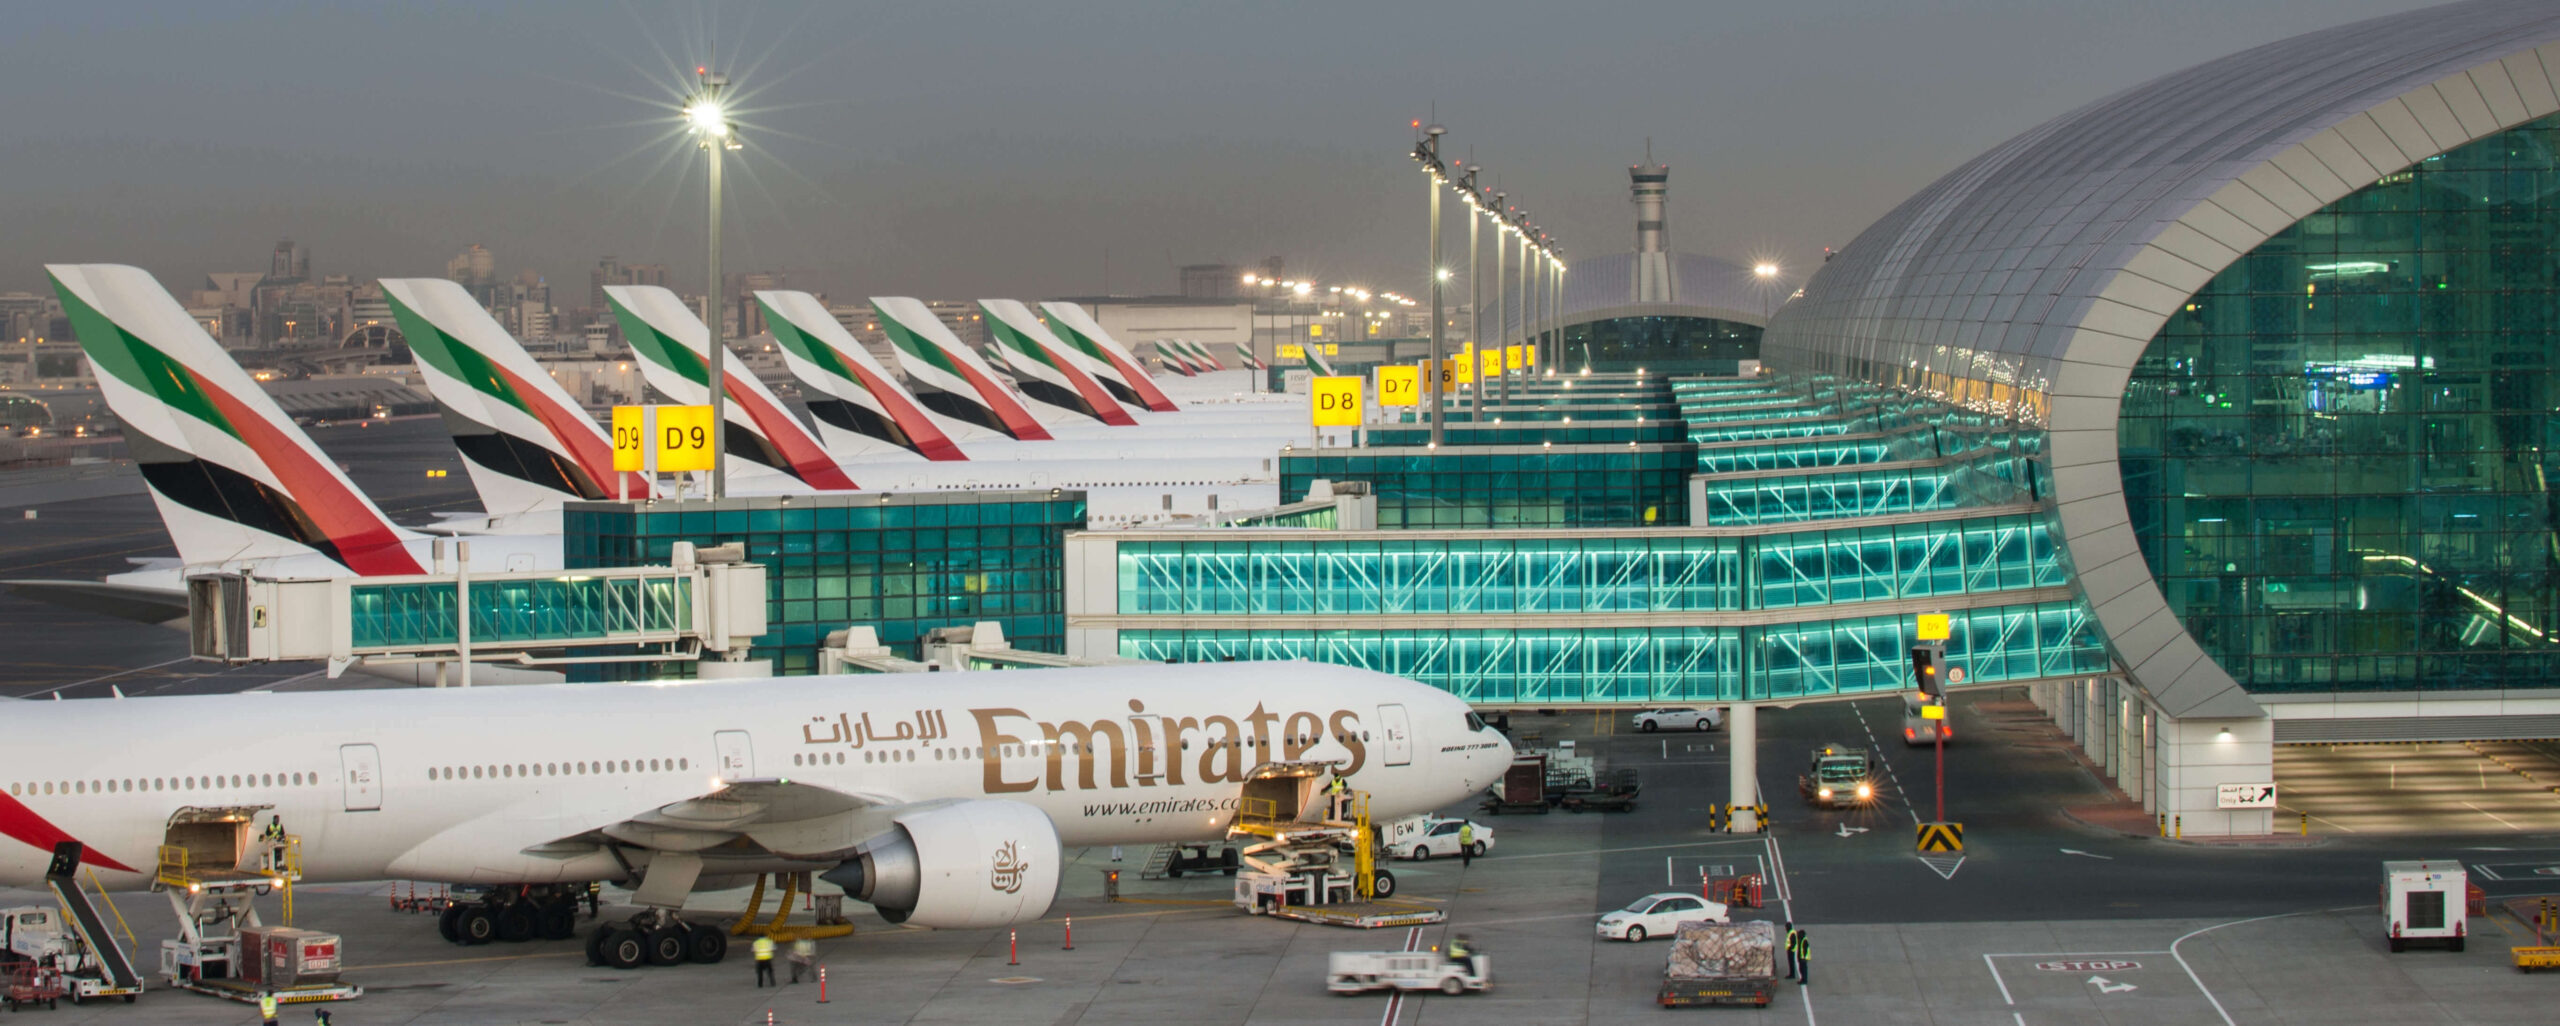 Best things to do during a stopover in Dubai - Dubai Airport